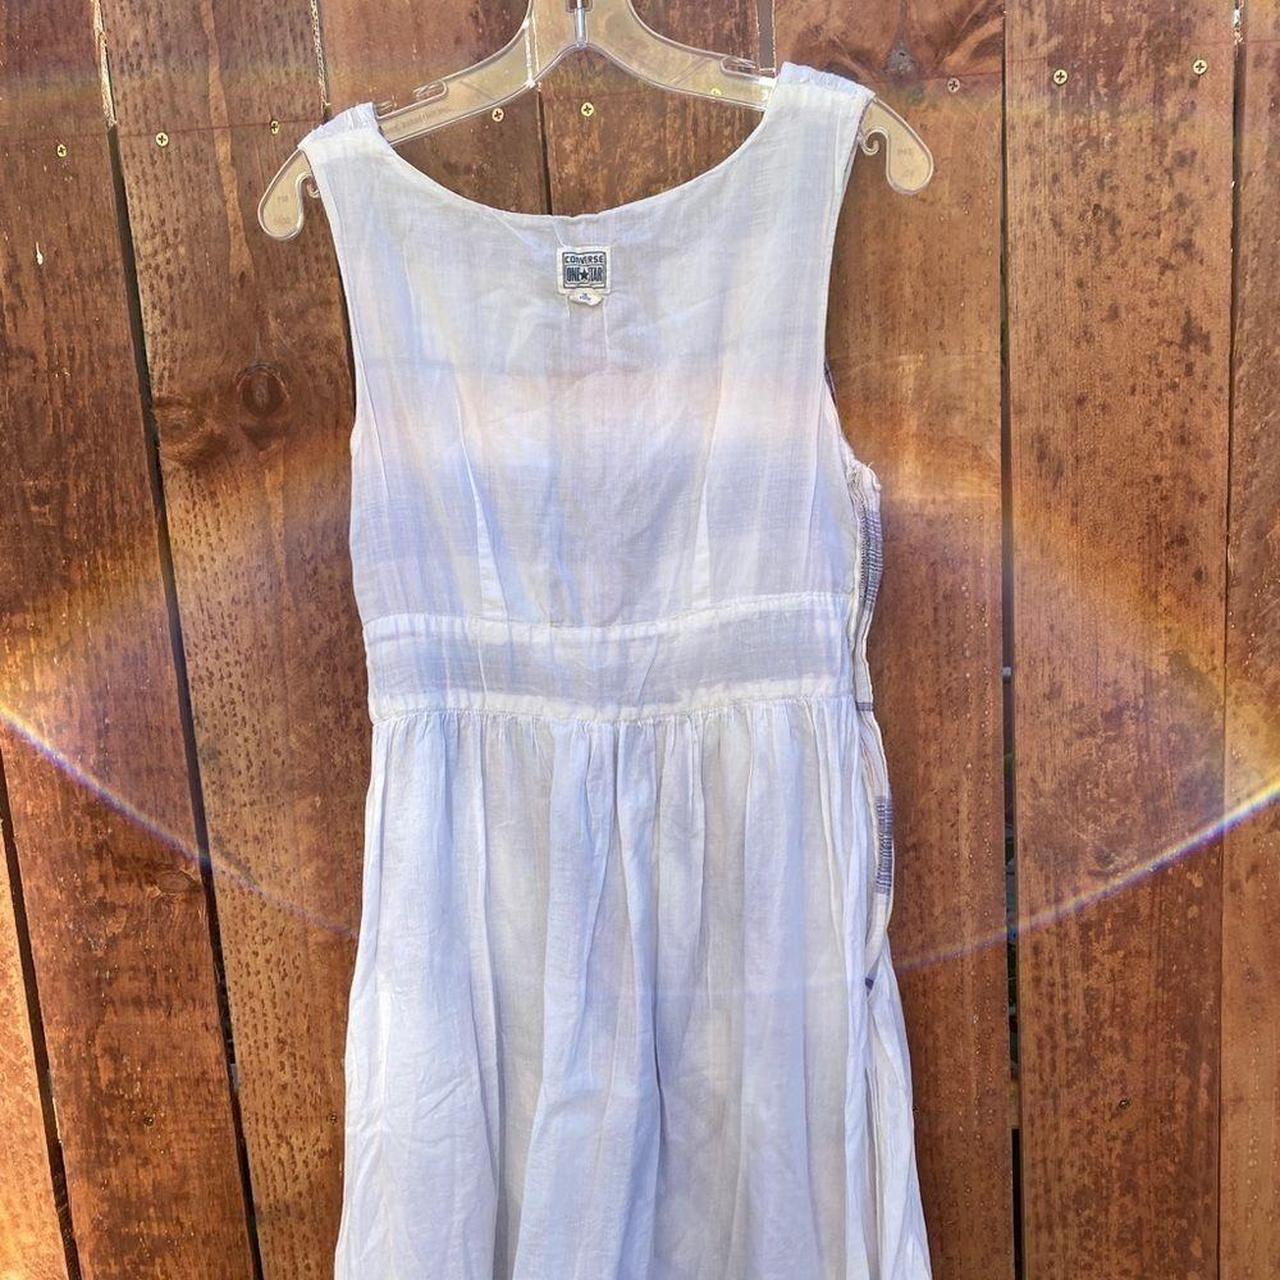 Product Image 4 - Converse One Star Dress, Size